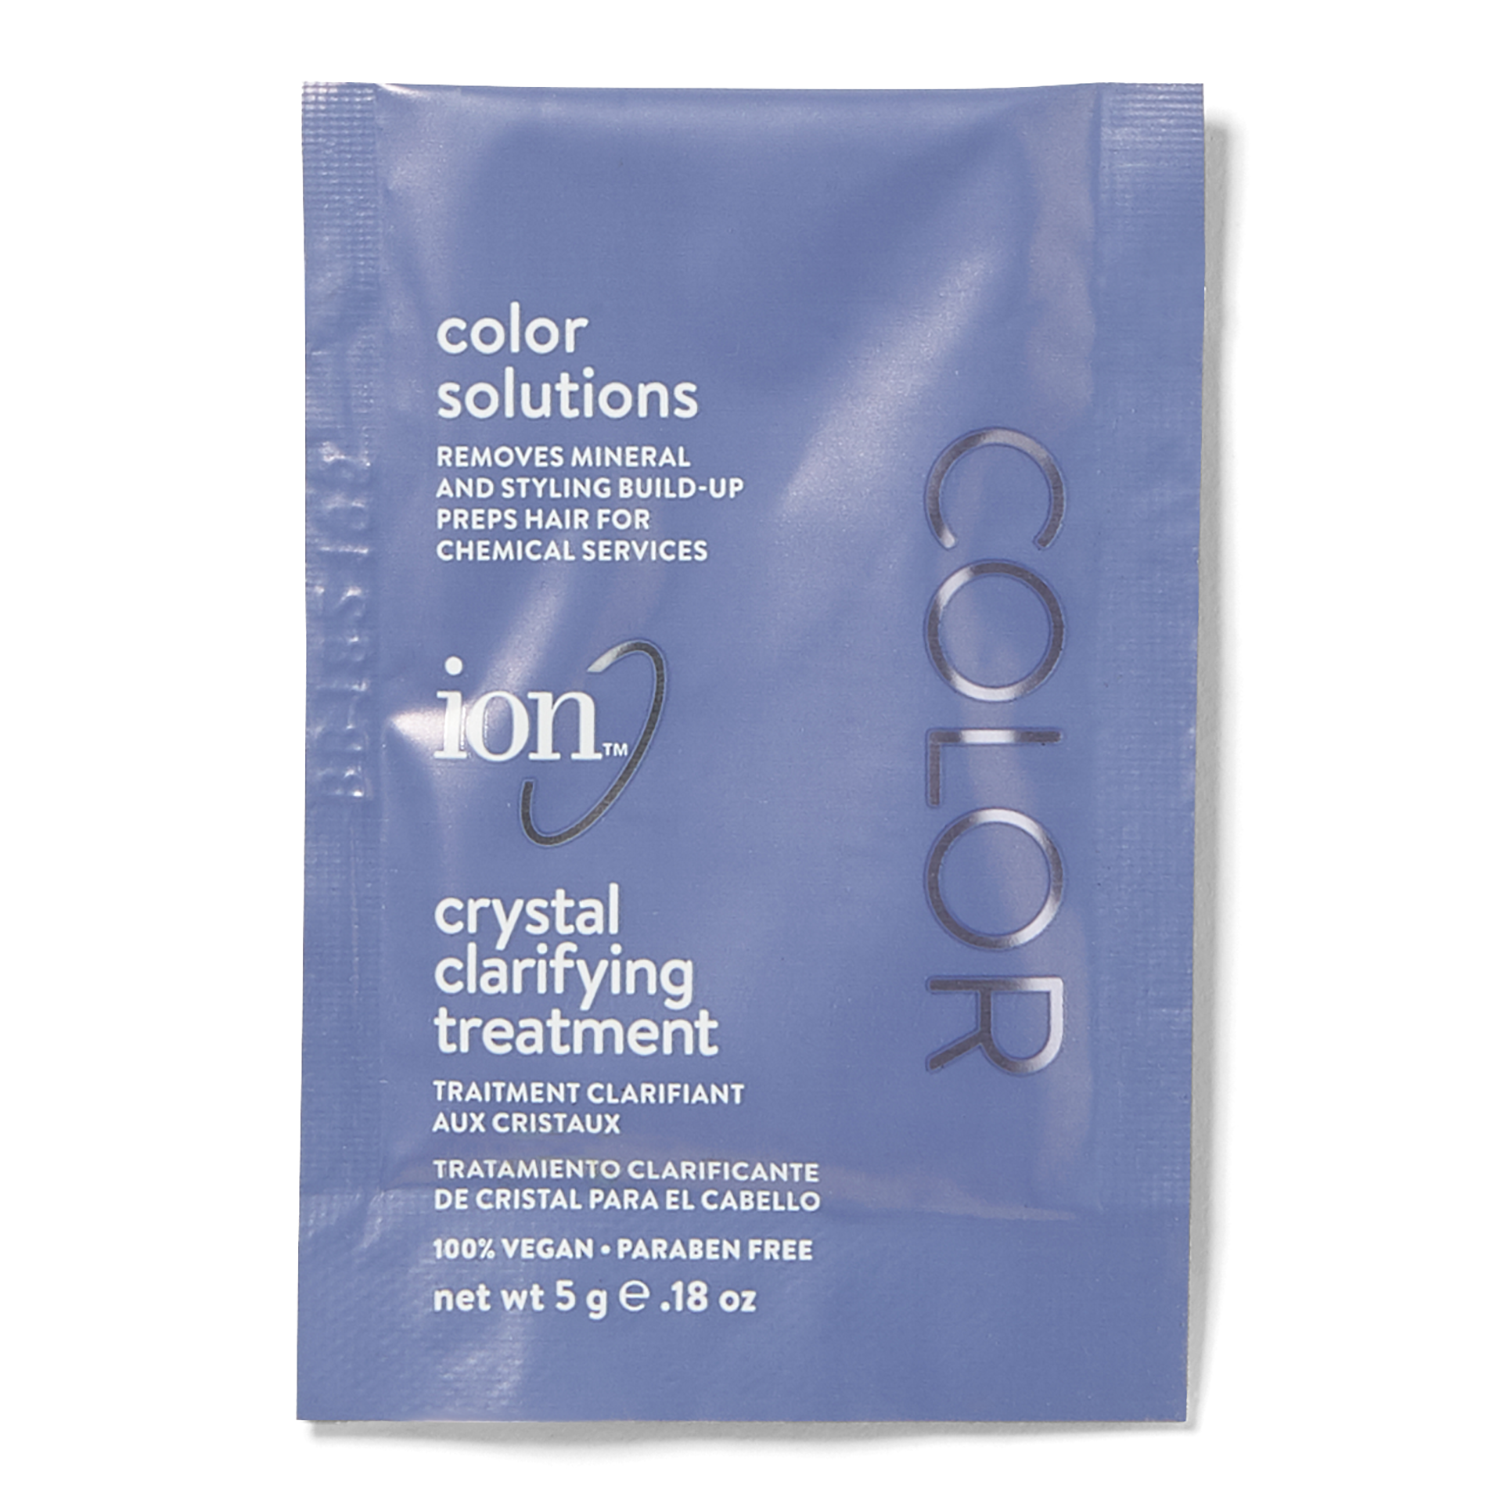 Color Oops Hair Color Prep Build-Up Treatment & System